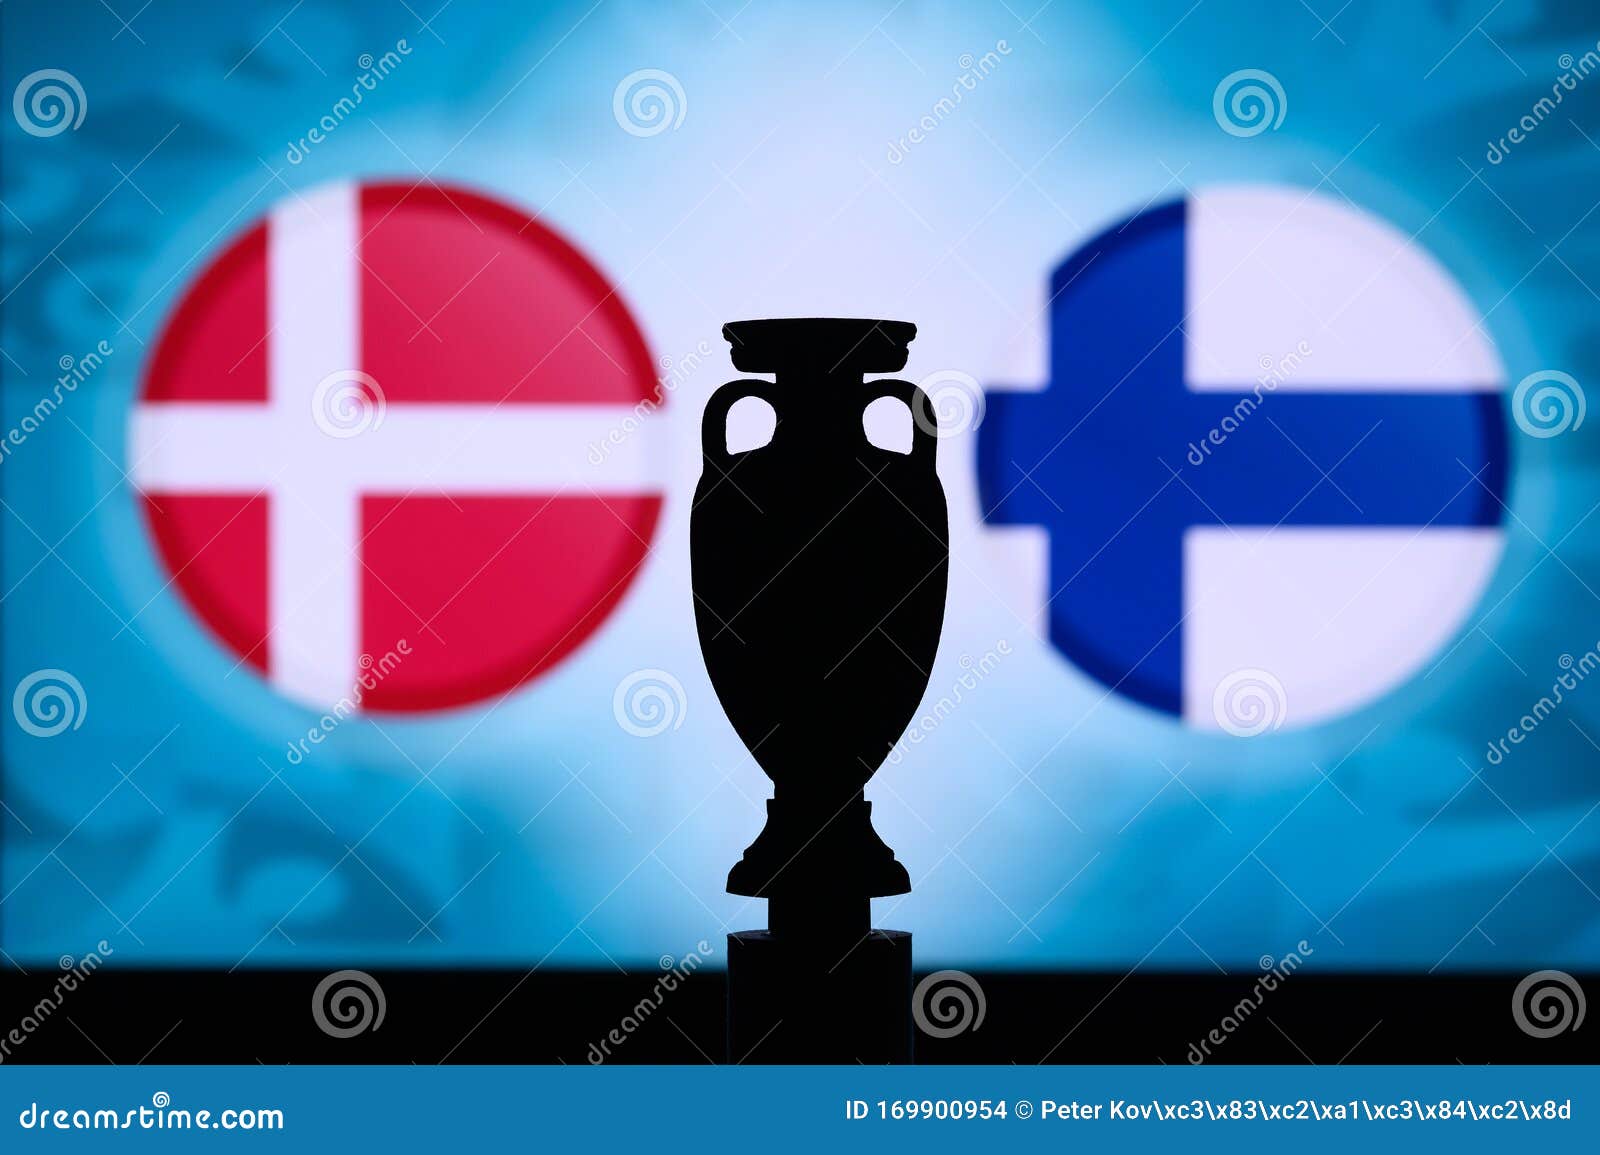 Denmark Vs Finland Euro National Flags And Football Trophy Silhouette Background For Soccer Match Group B Copenhagen 13 June Stock Photo Image Of Score Field 169900954